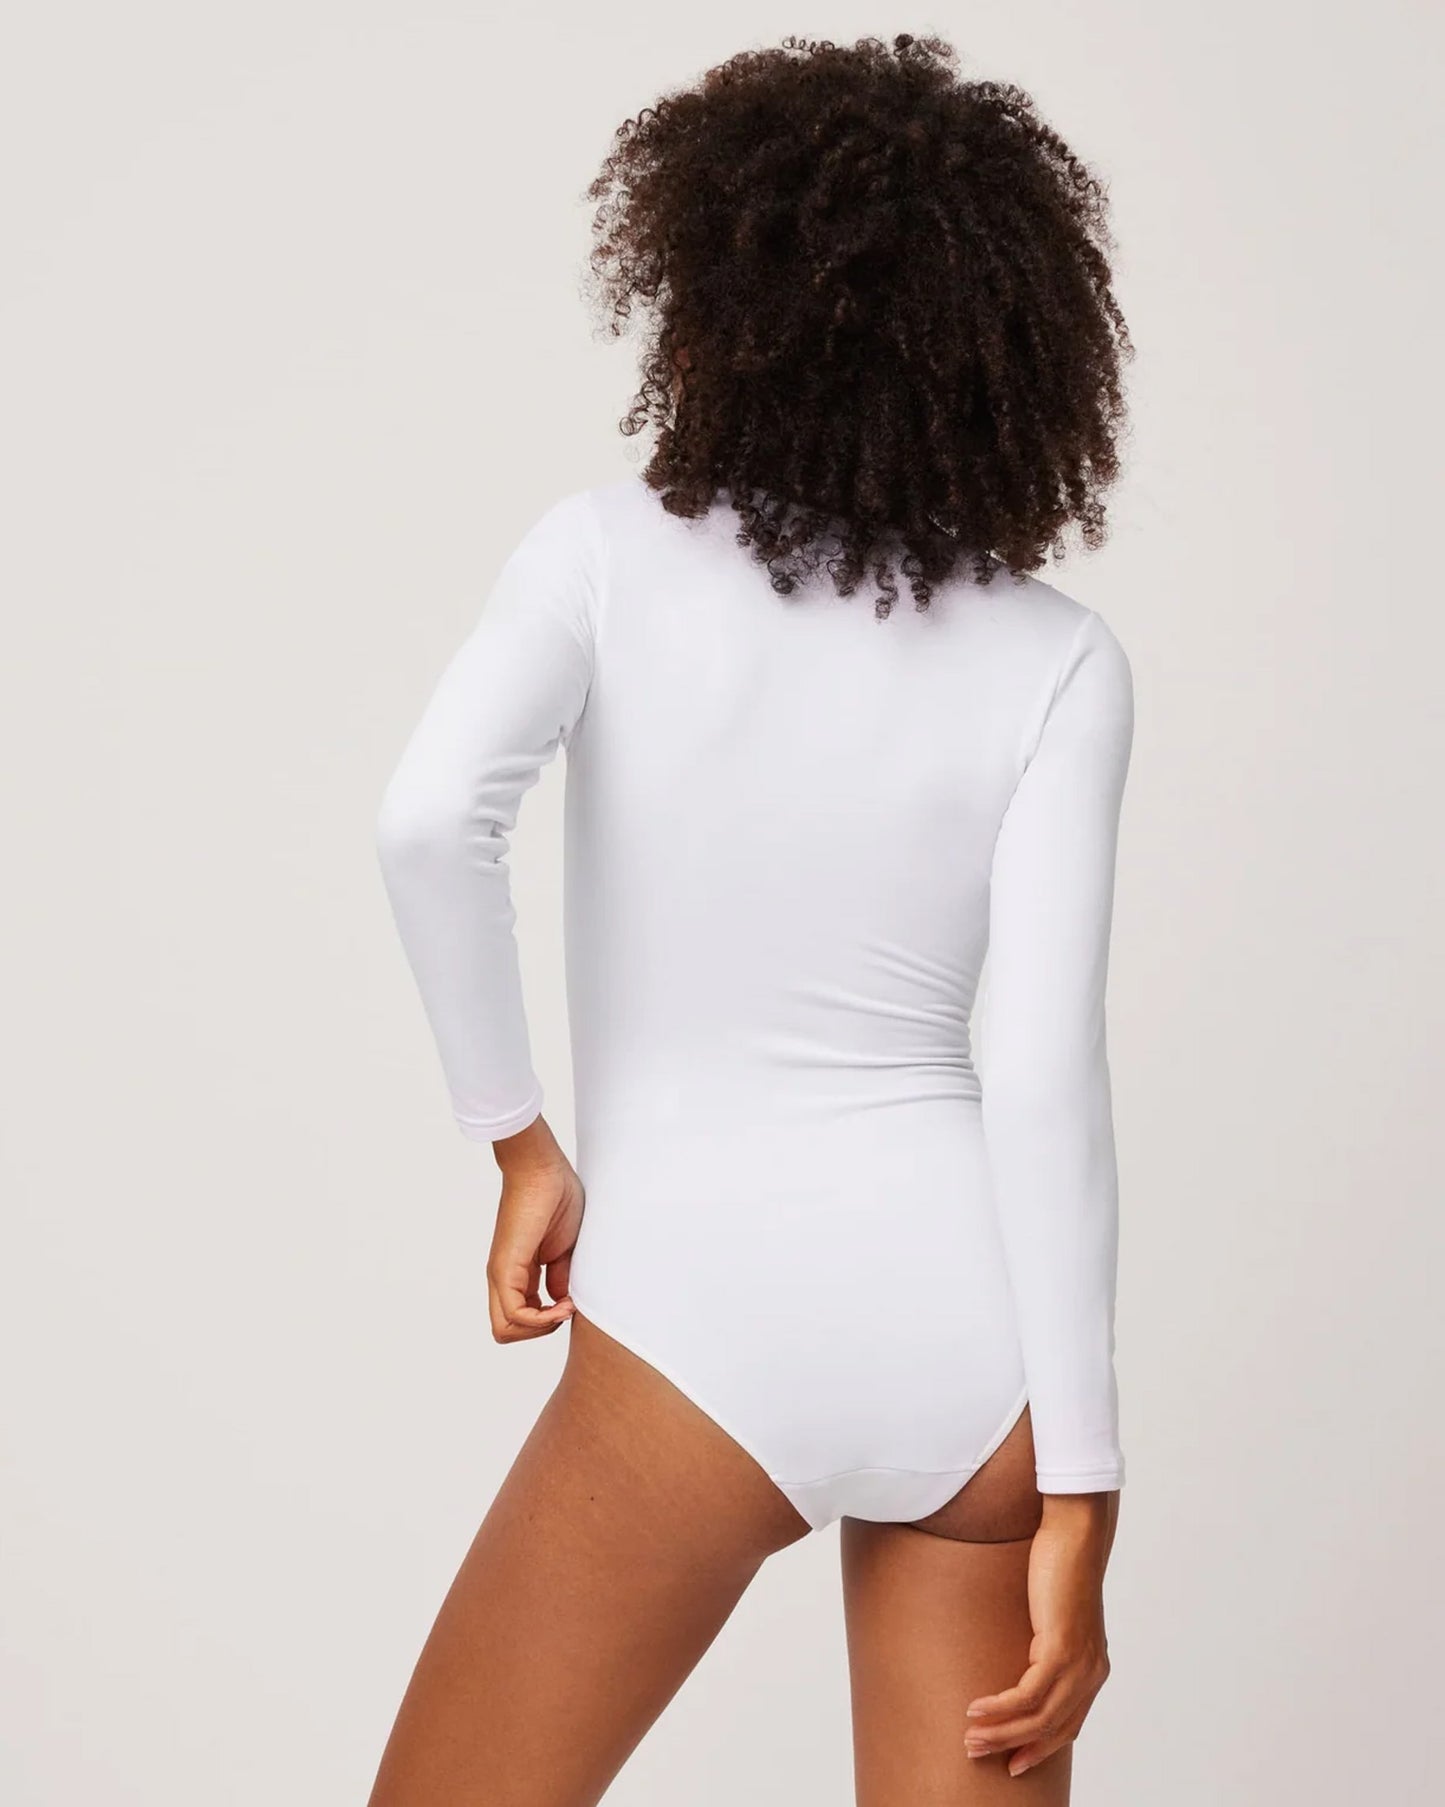 Ysabel Mora 70013 Lace Trim Body-Top - White soft and warm fleece lined long sleeved body-suit.